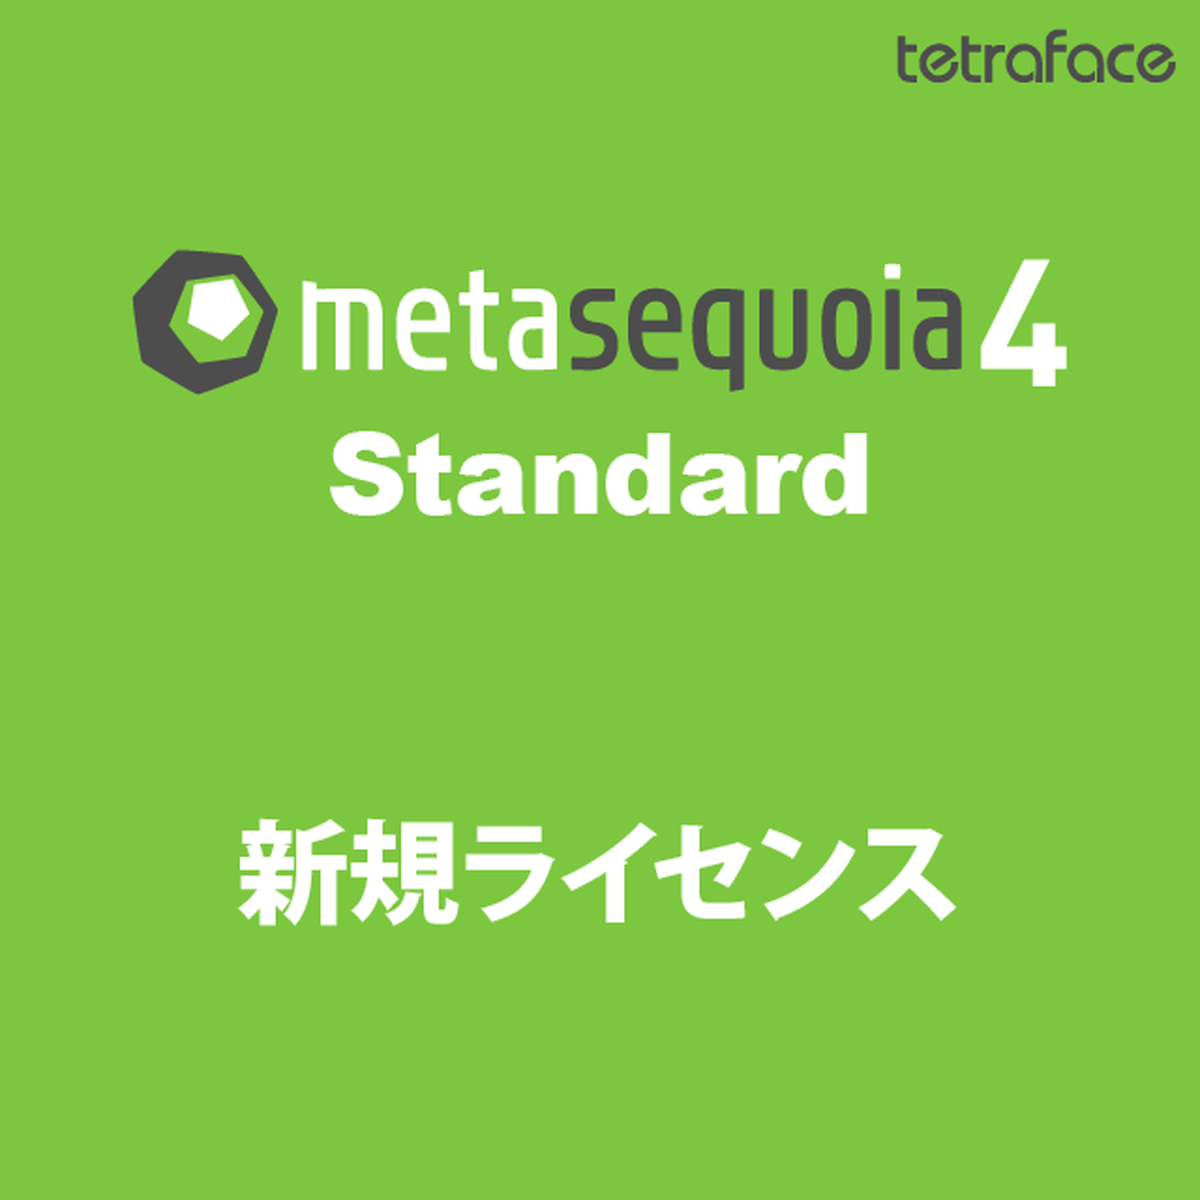 Metasequoia 4.8.6a instal the last version for android